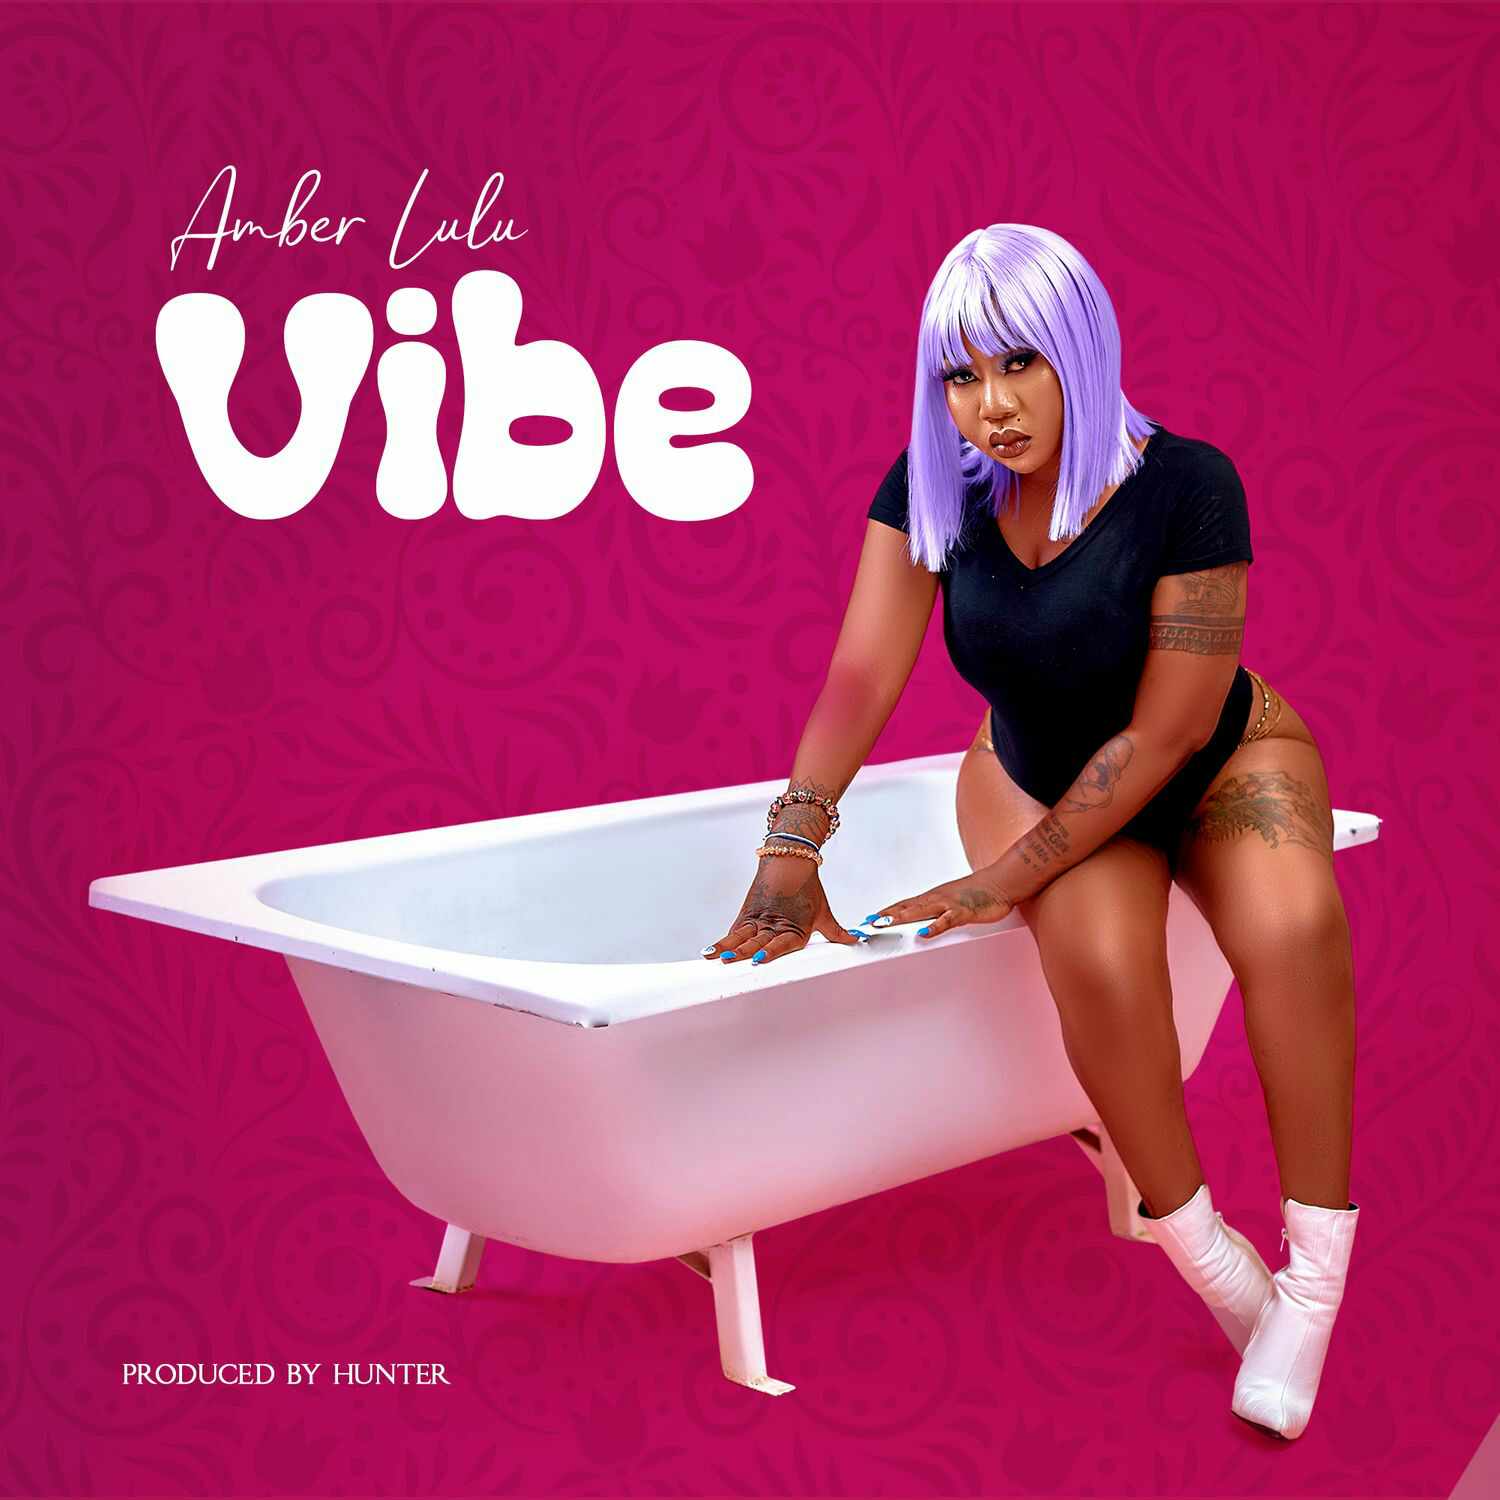 Vibe song by Amber Lulu